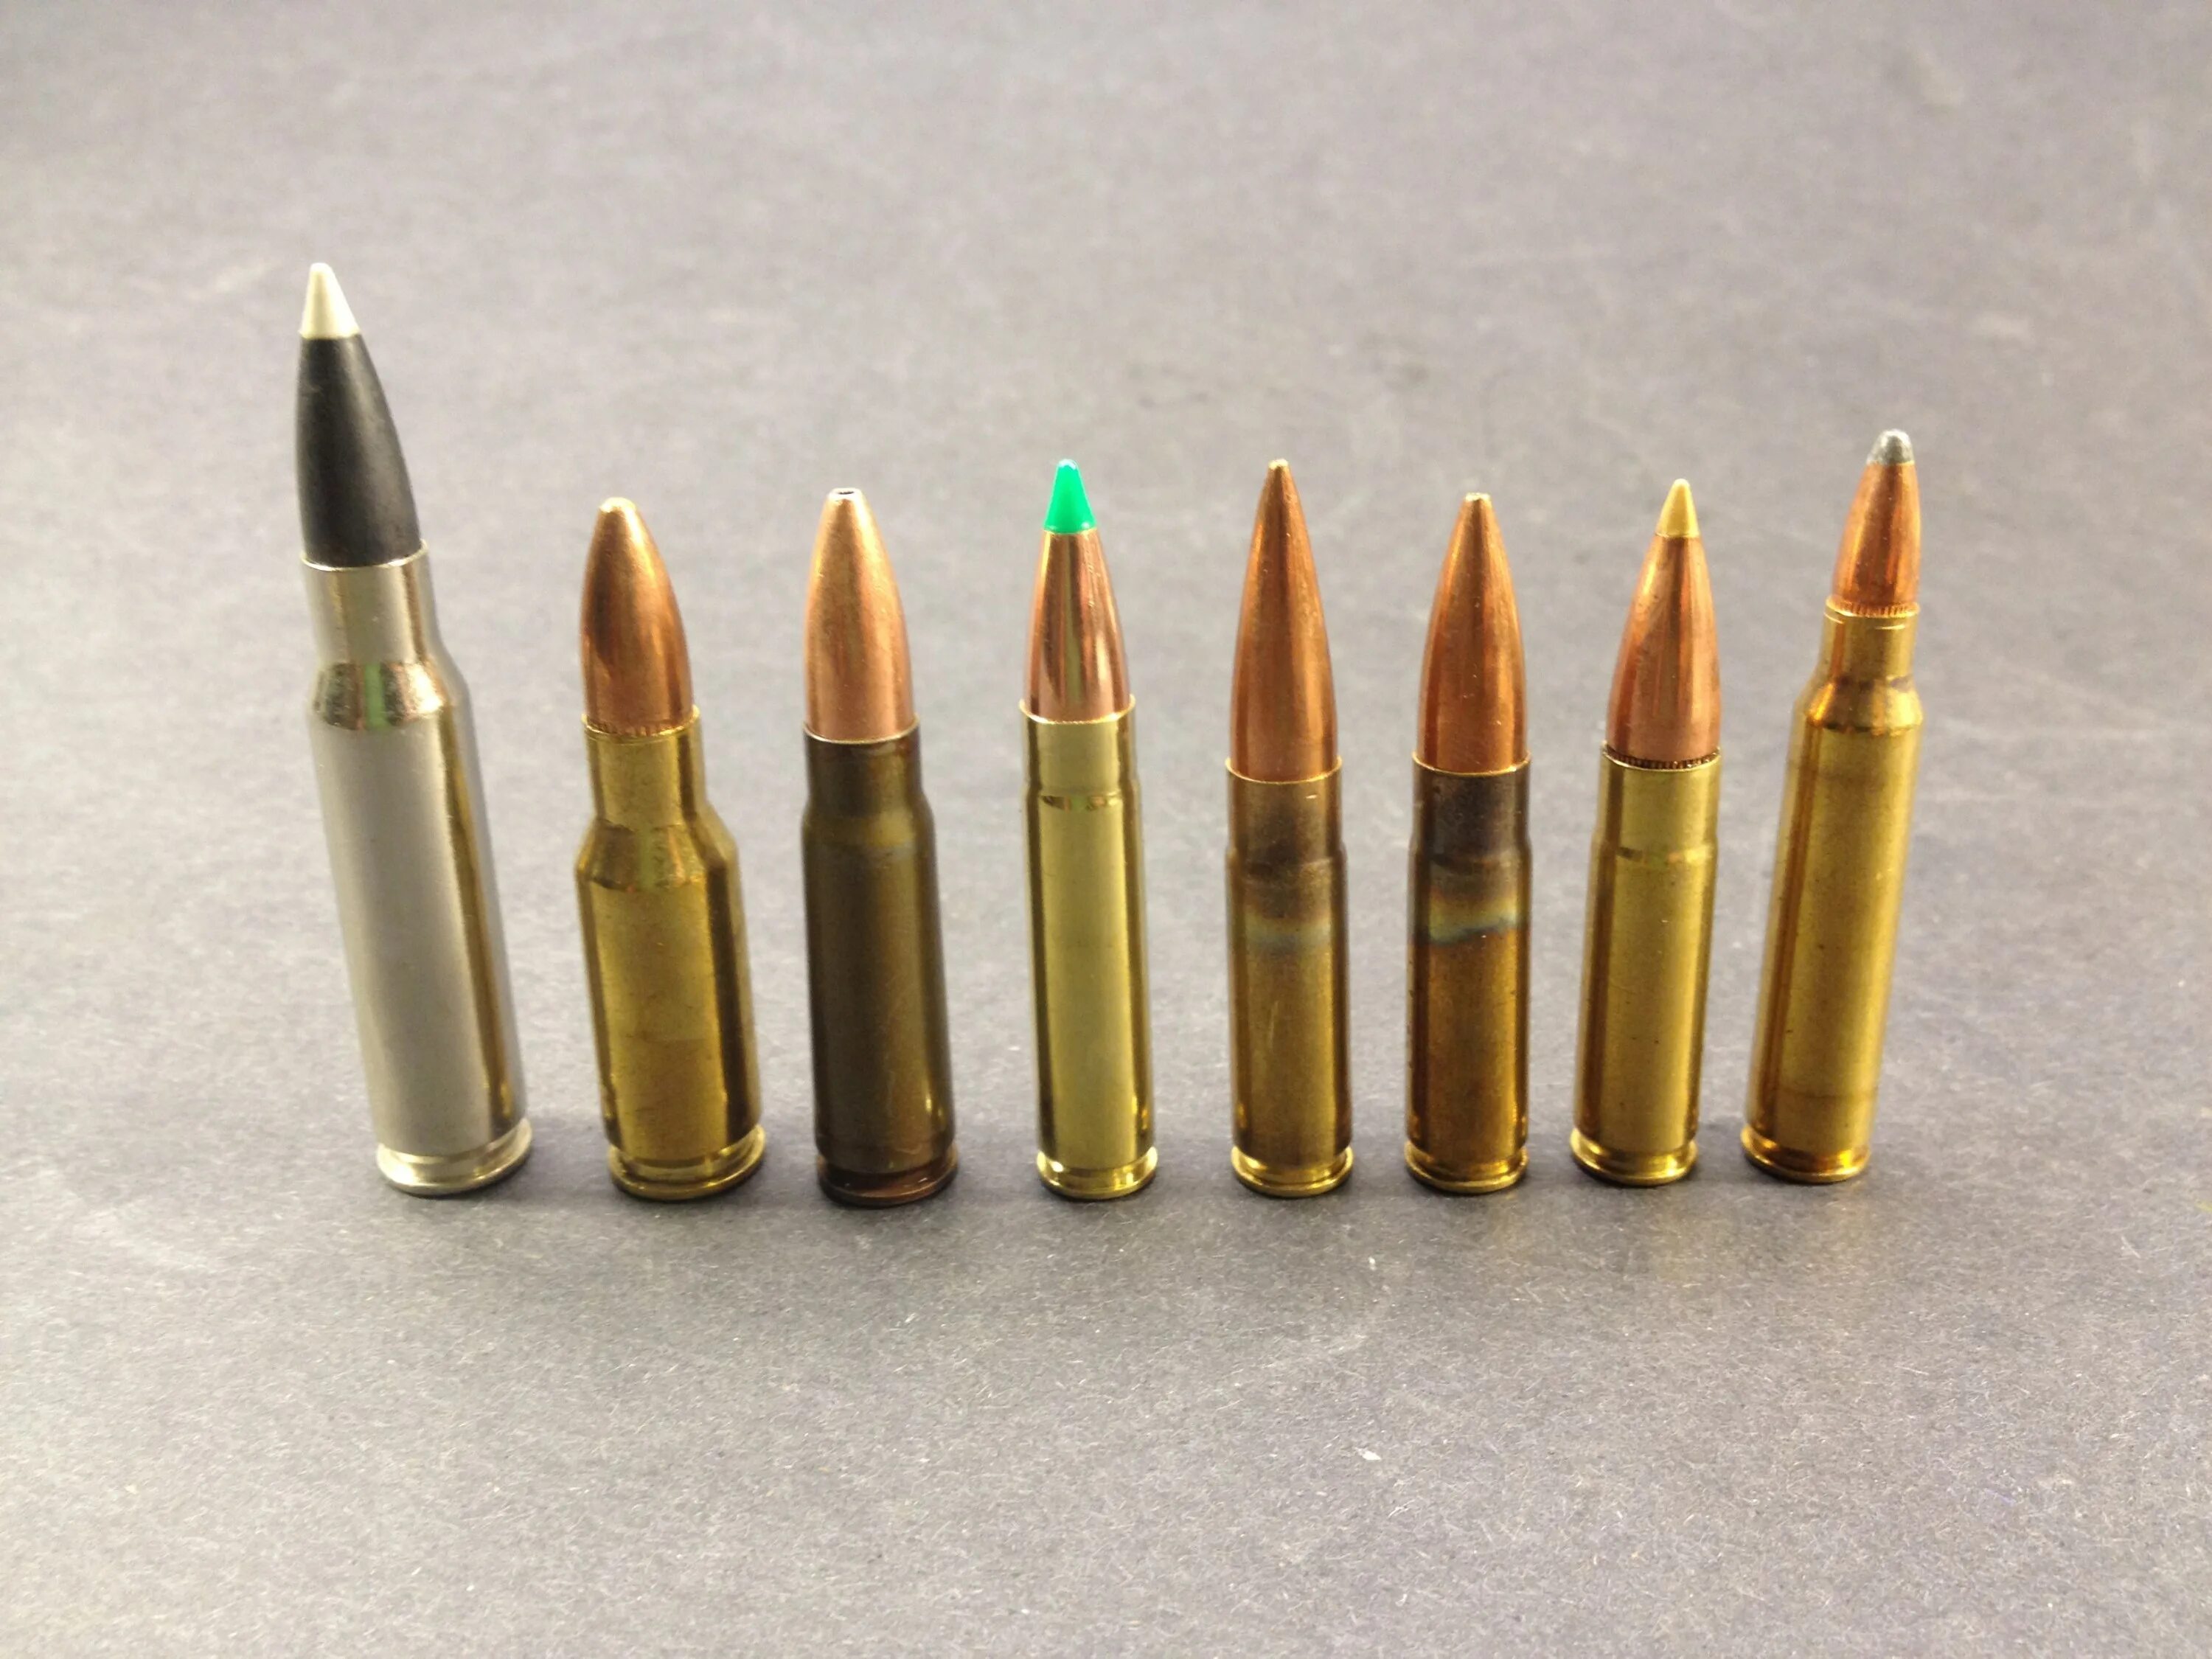 Калибр 300 Blackout. Калибр 300 aac Blackout. 308 Vs 7.62x39. 300 Blackout and 308. 308 winchester